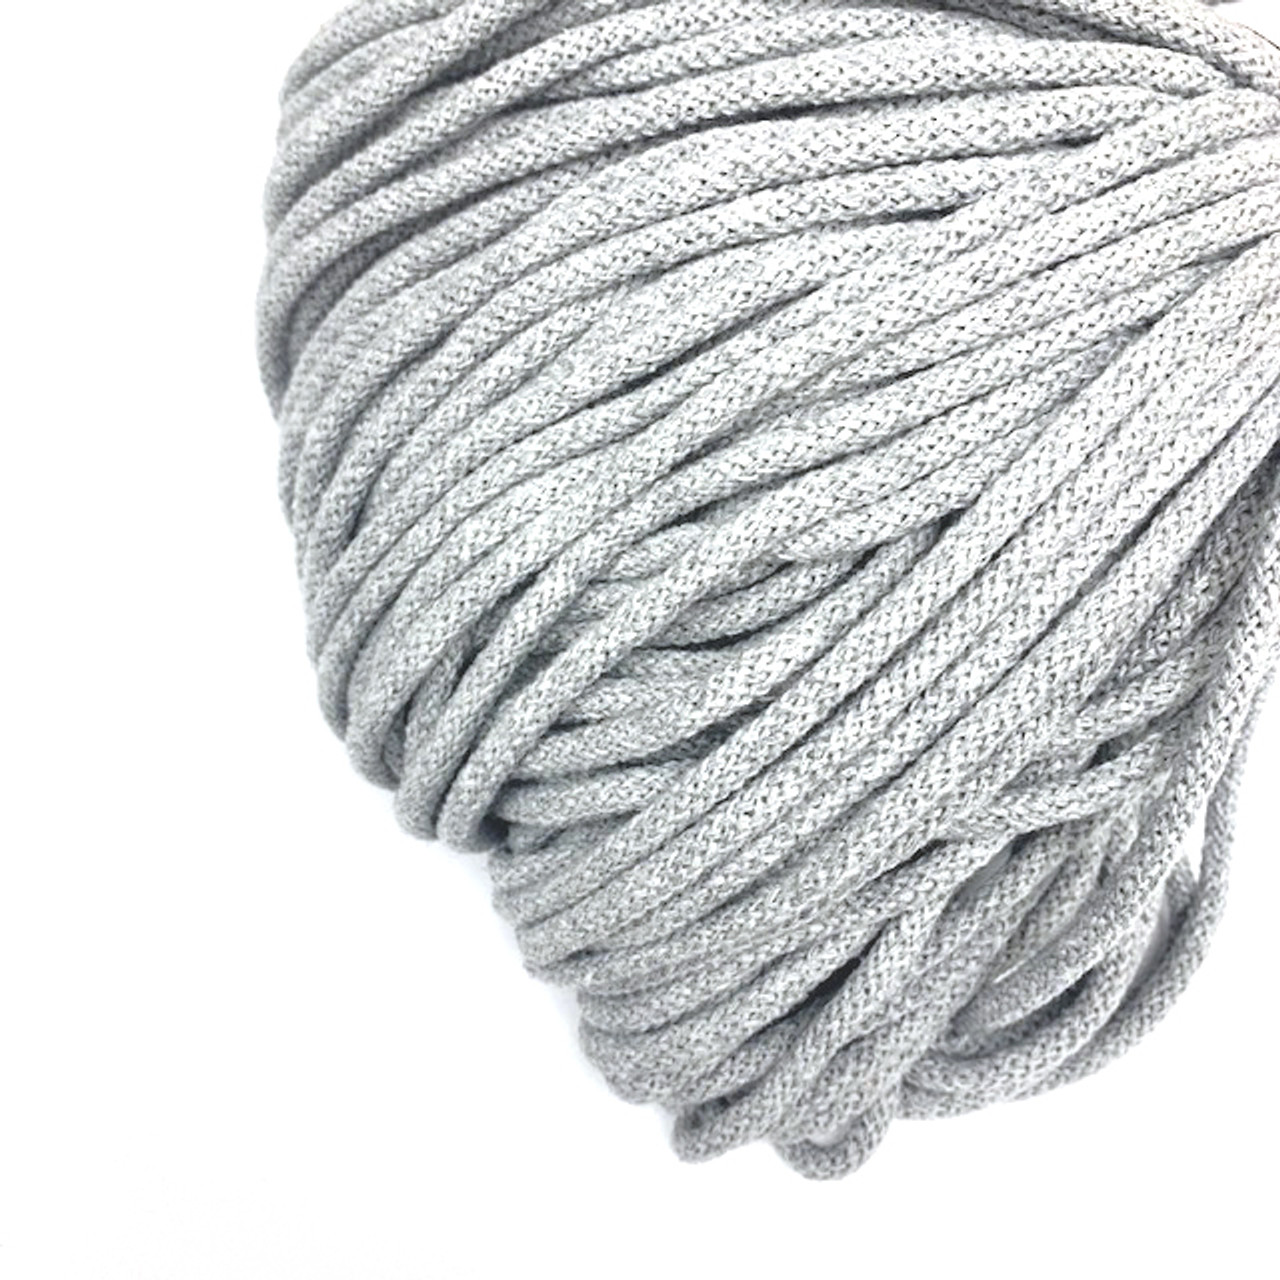 Silver - Drawstring Cord - 100% cotton - By The Yard